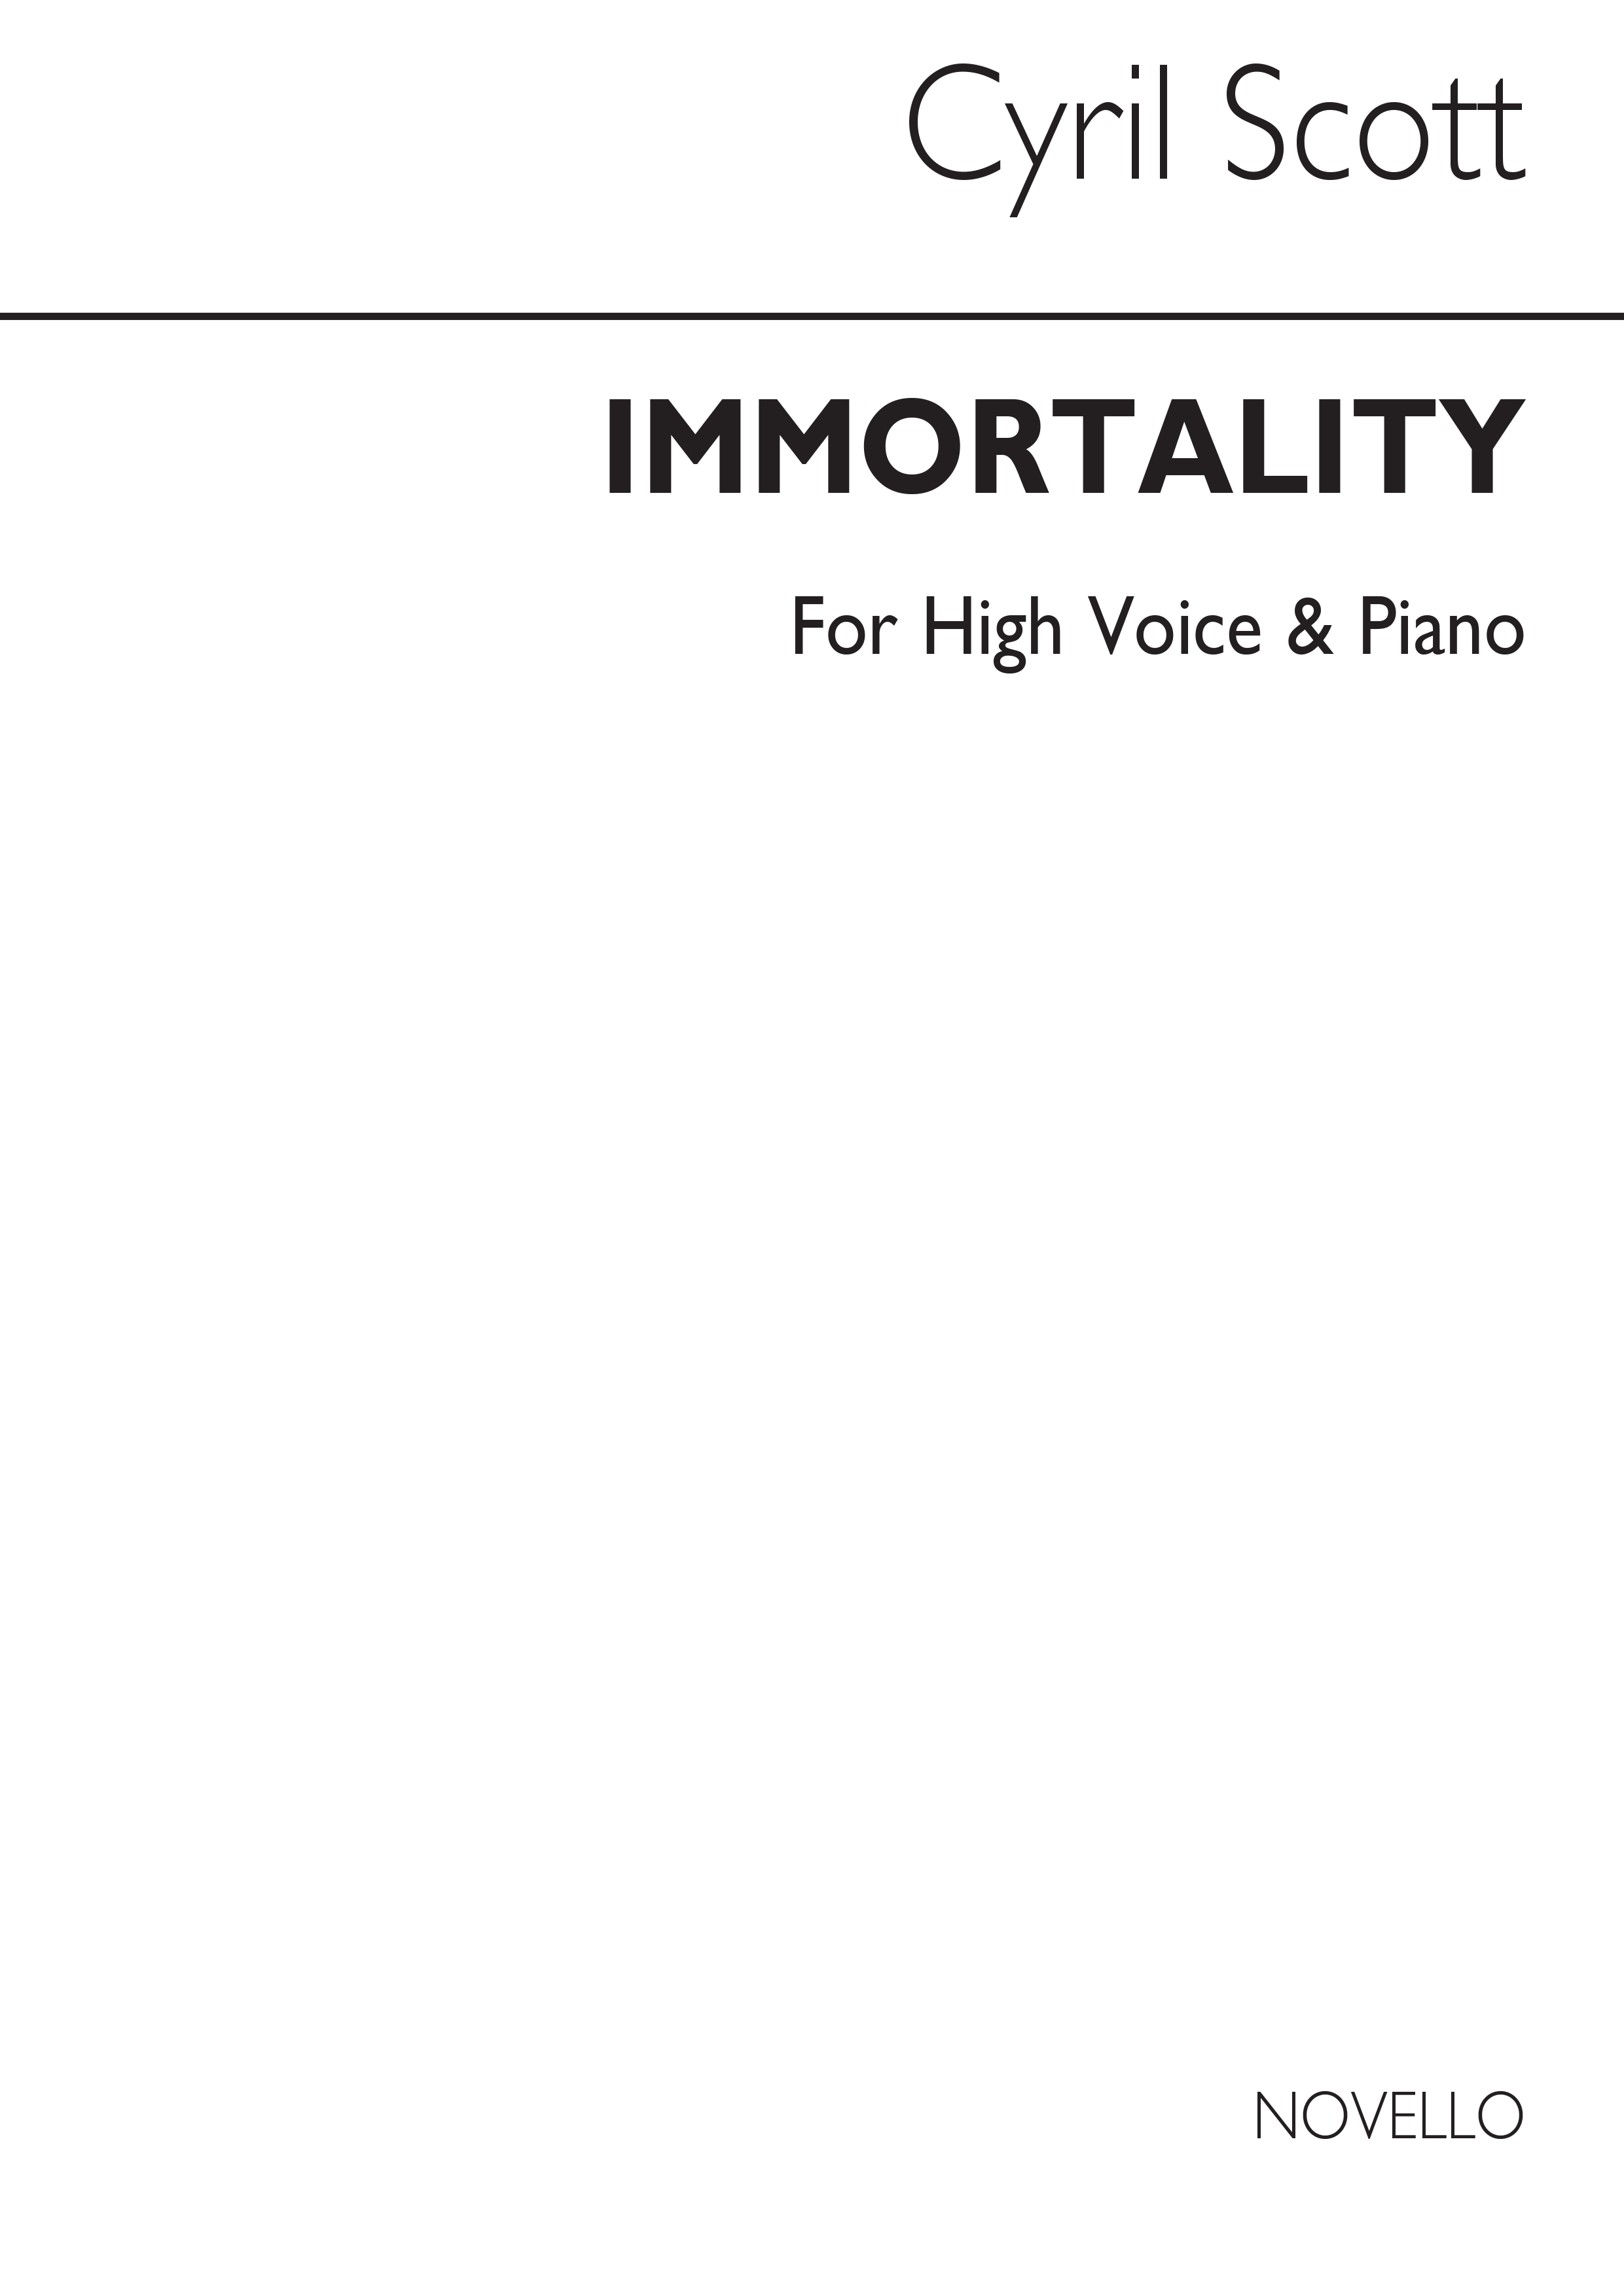 Cyril Scott: Immortality-high Voice/Piano (Key-g): High Voice: Vocal Work